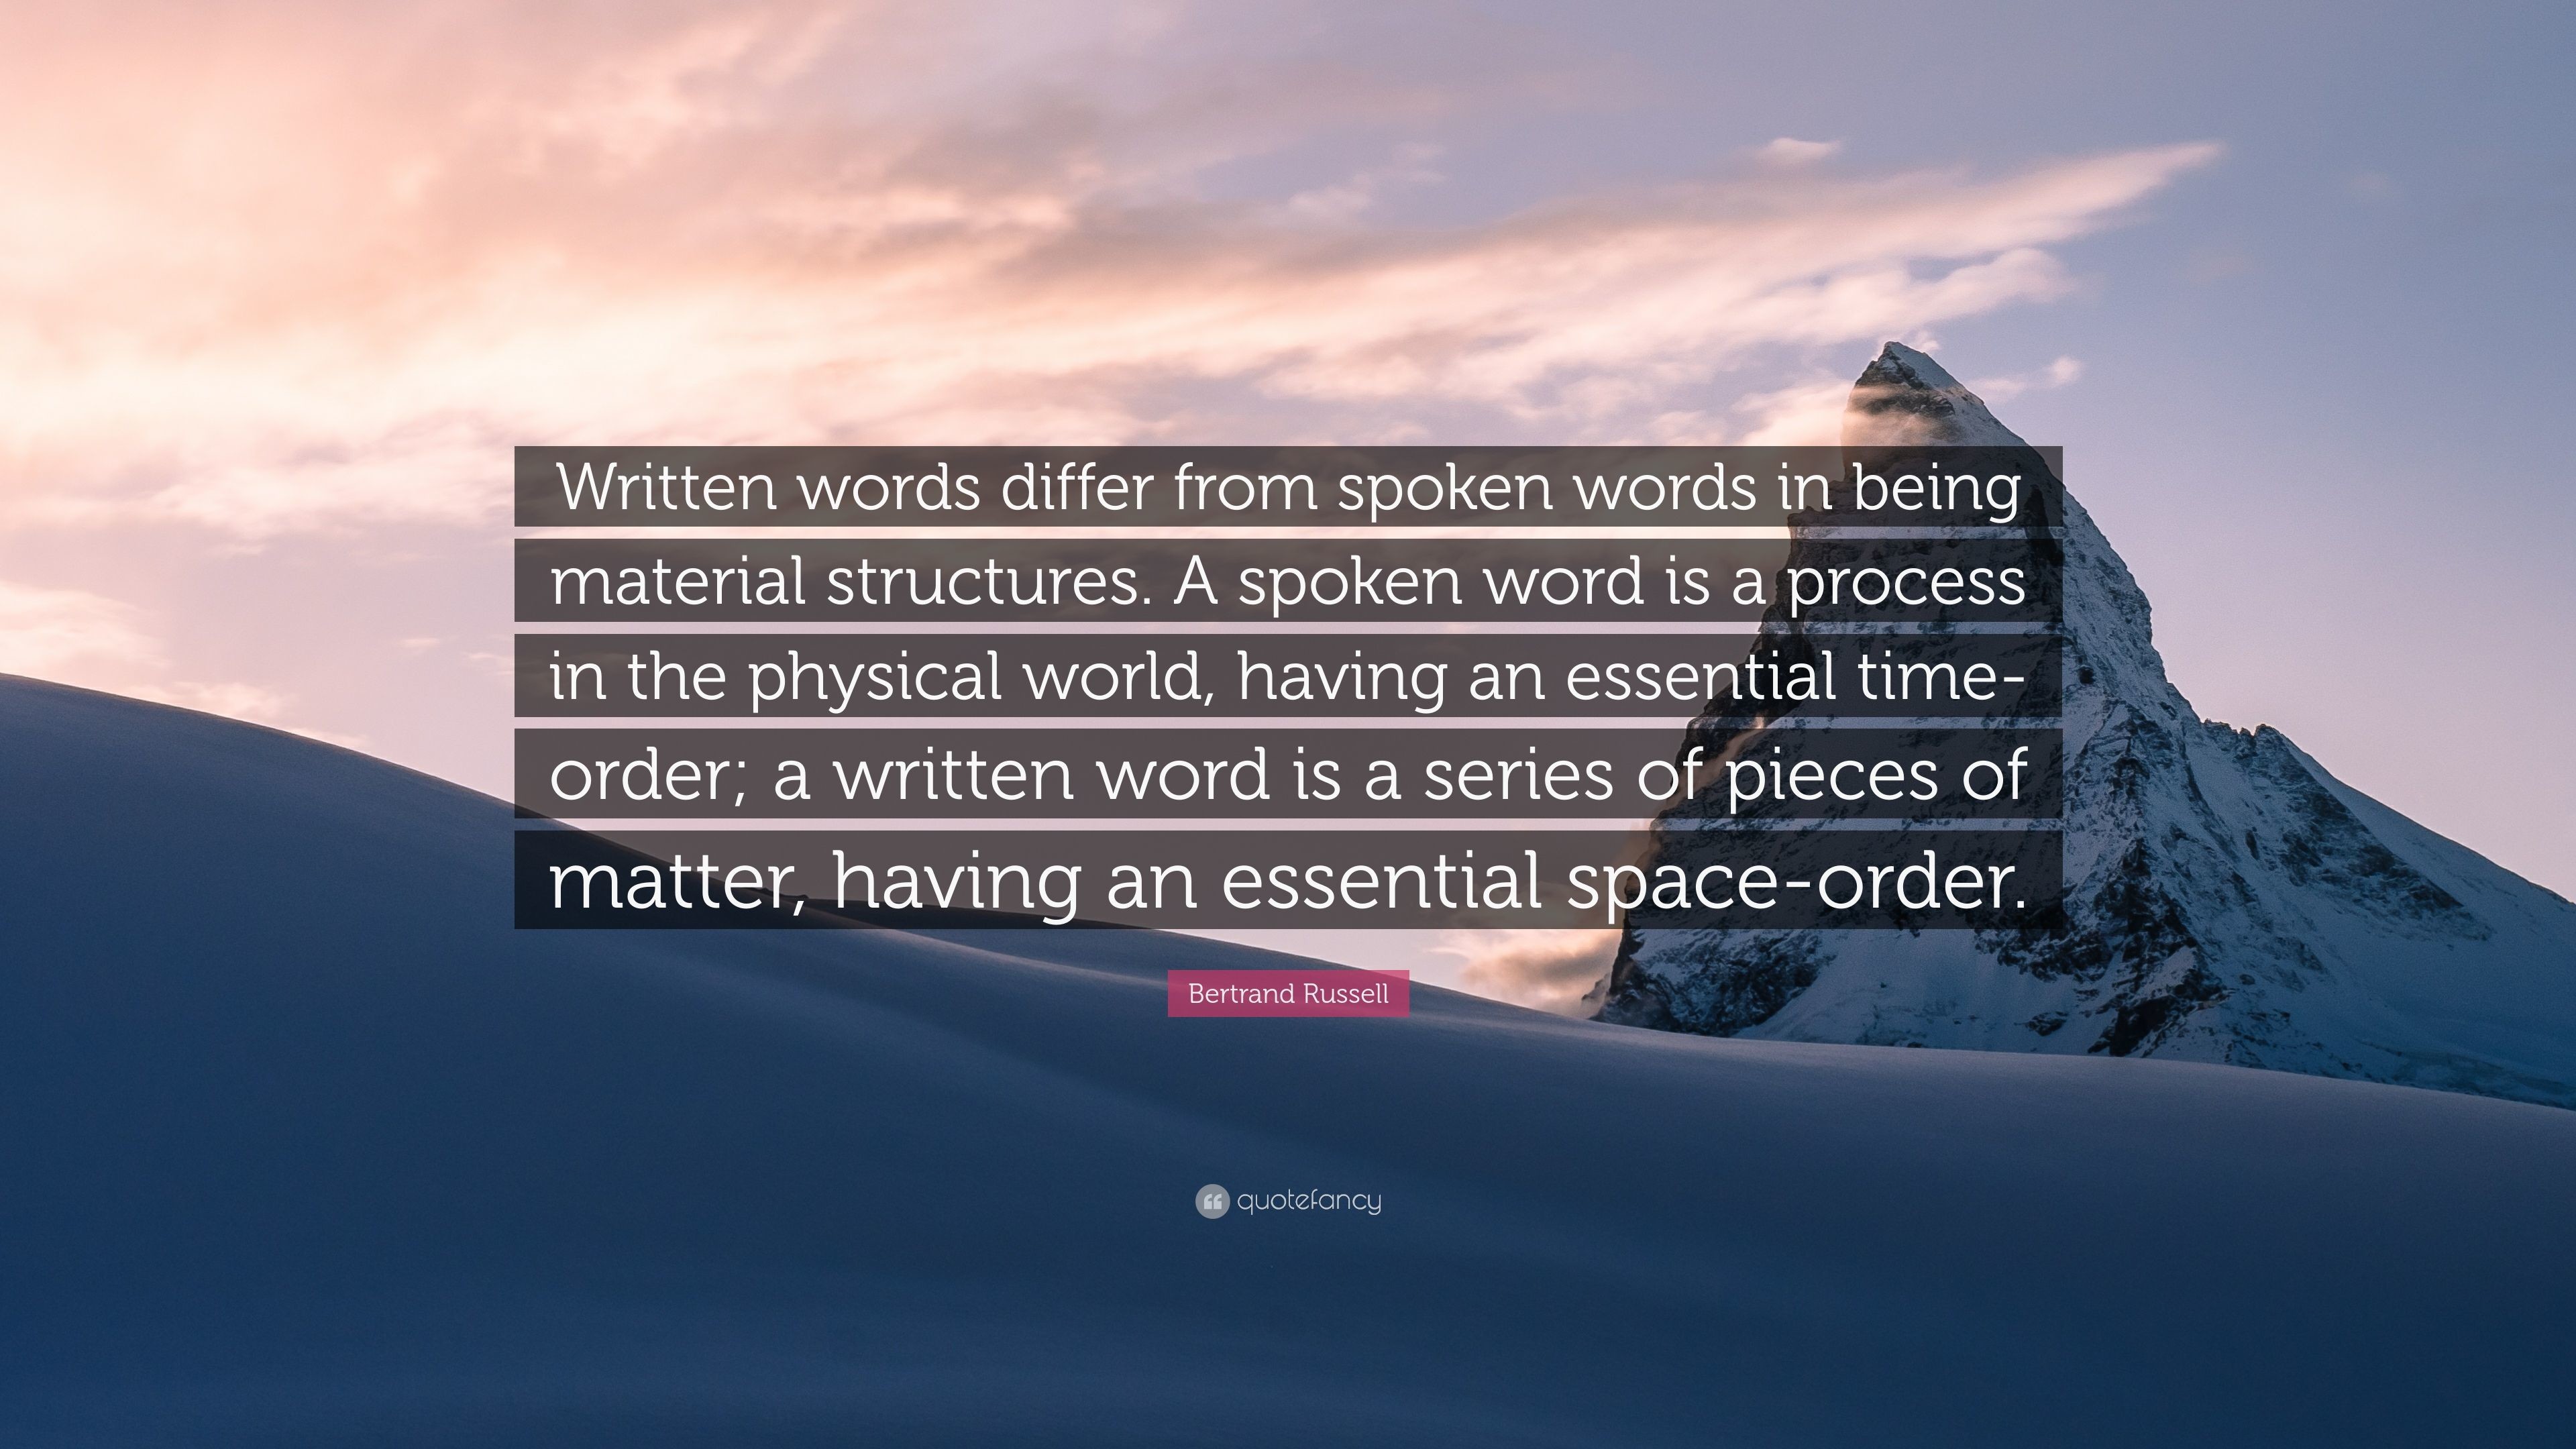 3840x2160 Bertrand Russell Quote: “Written words differ from spoken words in being  material structures.